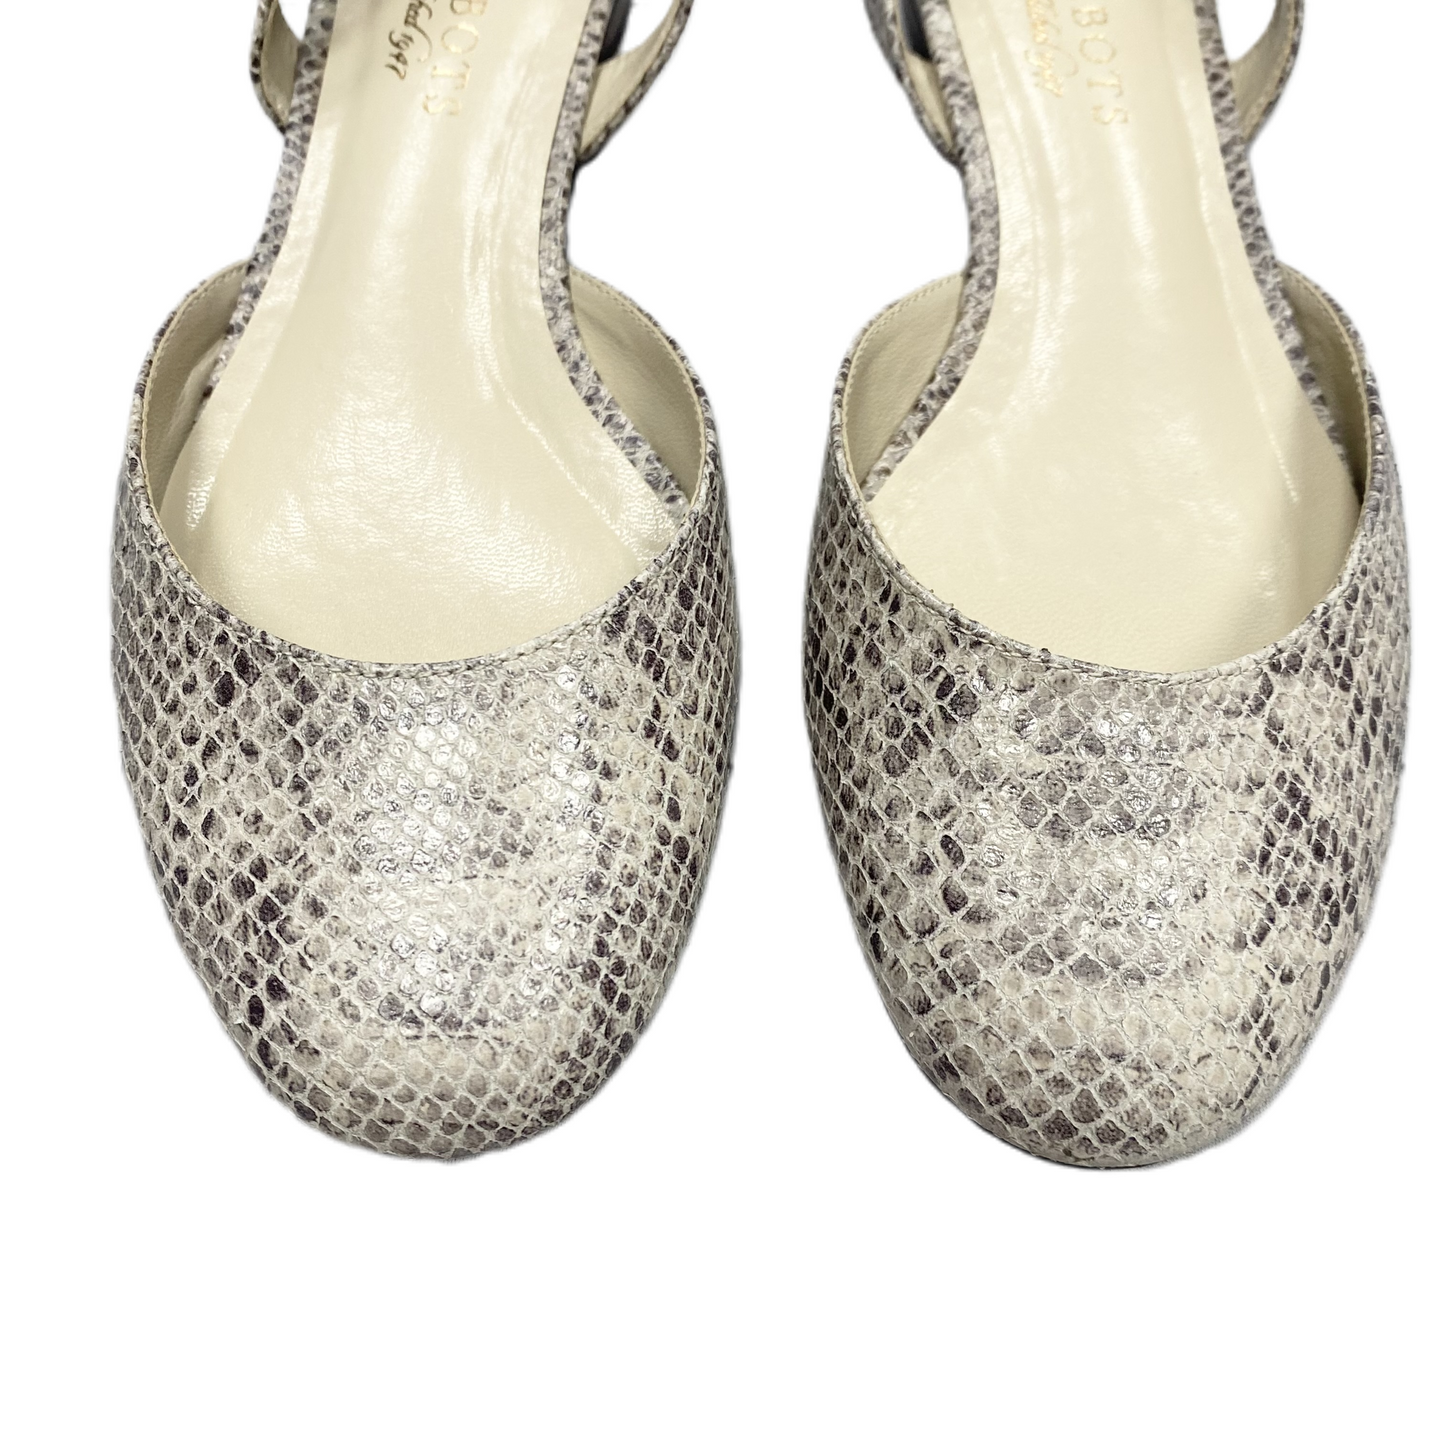 Snakeskin Print Shoes Flats By Talbots, Size: 6